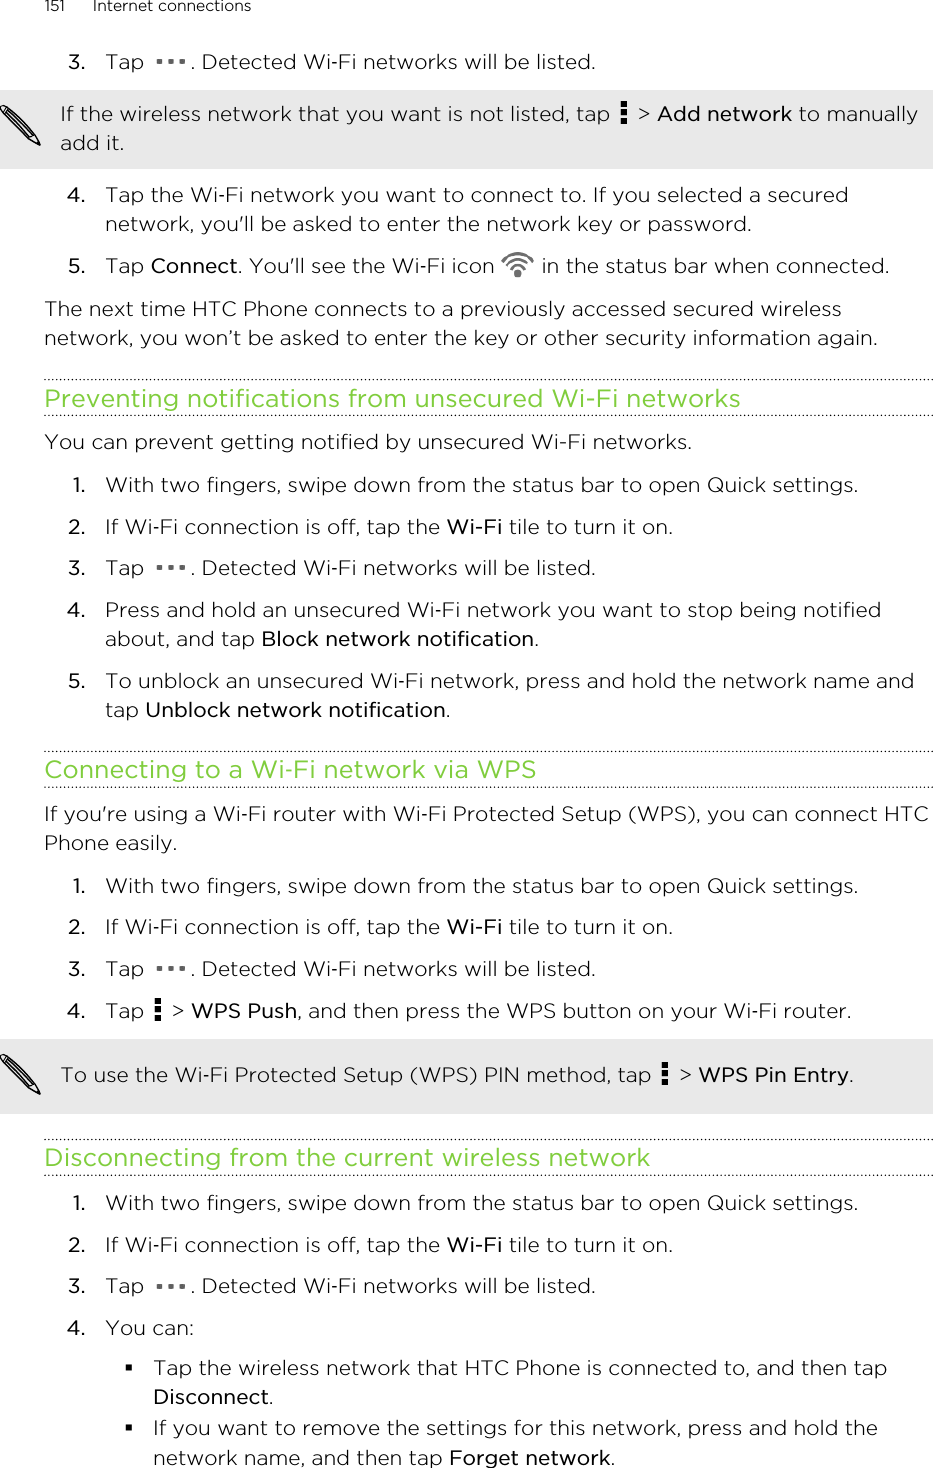 3. Tap  . Detected Wi‑Fi networks will be listed.If the wireless network that you want is not listed, tap   &gt; Add network to manuallyadd it.4. Tap the Wi‑Fi network you want to connect to. If you selected a securednetwork, you&apos;ll be asked to enter the network key or password.5. Tap Connect. You&apos;ll see the Wi‑Fi icon   in the status bar when connected.The next time HTC Phone connects to a previously accessed secured wirelessnetwork, you won’t be asked to enter the key or other security information again.Preventing notifications from unsecured Wi-Fi networksYou can prevent getting notified by unsecured Wi-Fi networks.1. With two fingers, swipe down from the status bar to open Quick settings.2. If Wi‑Fi connection is off, tap the Wi-Fi tile to turn it on.3. Tap  . Detected Wi‑Fi networks will be listed.4. Press and hold an unsecured Wi‑Fi network you want to stop being notifiedabout, and tap Block network notification.5. To unblock an unsecured Wi‑Fi network, press and hold the network name andtap Unblock network notification.Connecting to a Wi‑Fi network via WPSIf you&apos;re using a Wi‑Fi router with Wi‑Fi Protected Setup (WPS), you can connect HTCPhone easily.1. With two fingers, swipe down from the status bar to open Quick settings.2. If Wi‑Fi connection is off, tap the Wi-Fi tile to turn it on.3. Tap  . Detected Wi‑Fi networks will be listed.4. Tap   &gt; WPS Push, and then press the WPS button on your Wi‑Fi router. To use the Wi‑Fi Protected Setup (WPS) PIN method, tap   &gt; WPS Pin Entry.Disconnecting from the current wireless network1. With two fingers, swipe down from the status bar to open Quick settings.2. If Wi‑Fi connection is off, tap the Wi-Fi tile to turn it on.3. Tap  . Detected Wi‑Fi networks will be listed.4. You can:§Tap the wireless network that HTC Phone is connected to, and then tapDisconnect.§If you want to remove the settings for this network, press and hold thenetwork name, and then tap Forget network.151 Internet connectionsHTC Confidential for Certification HTC Confidential for Certification 